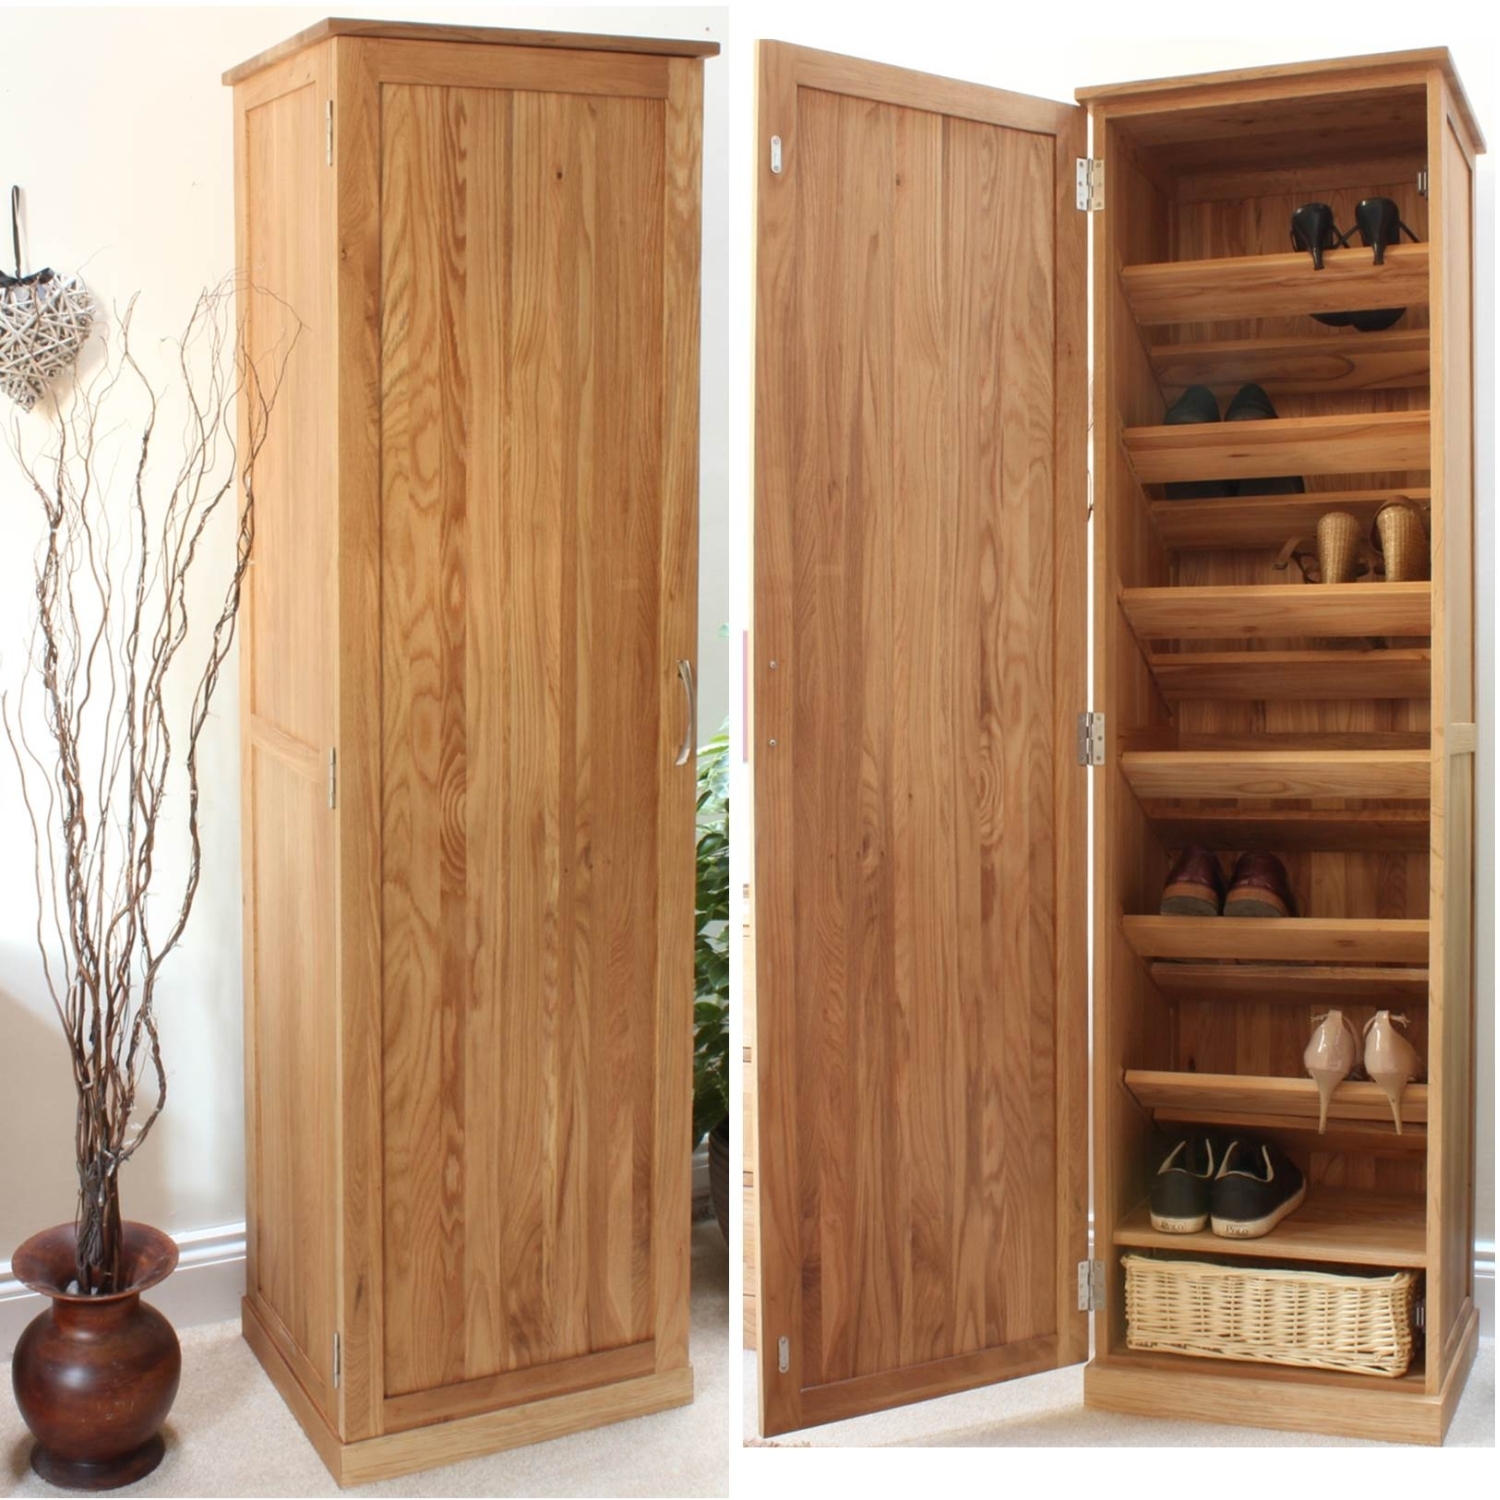 Storage Cabinets With Doors Visualhunt, Wooden Shelves With Doors